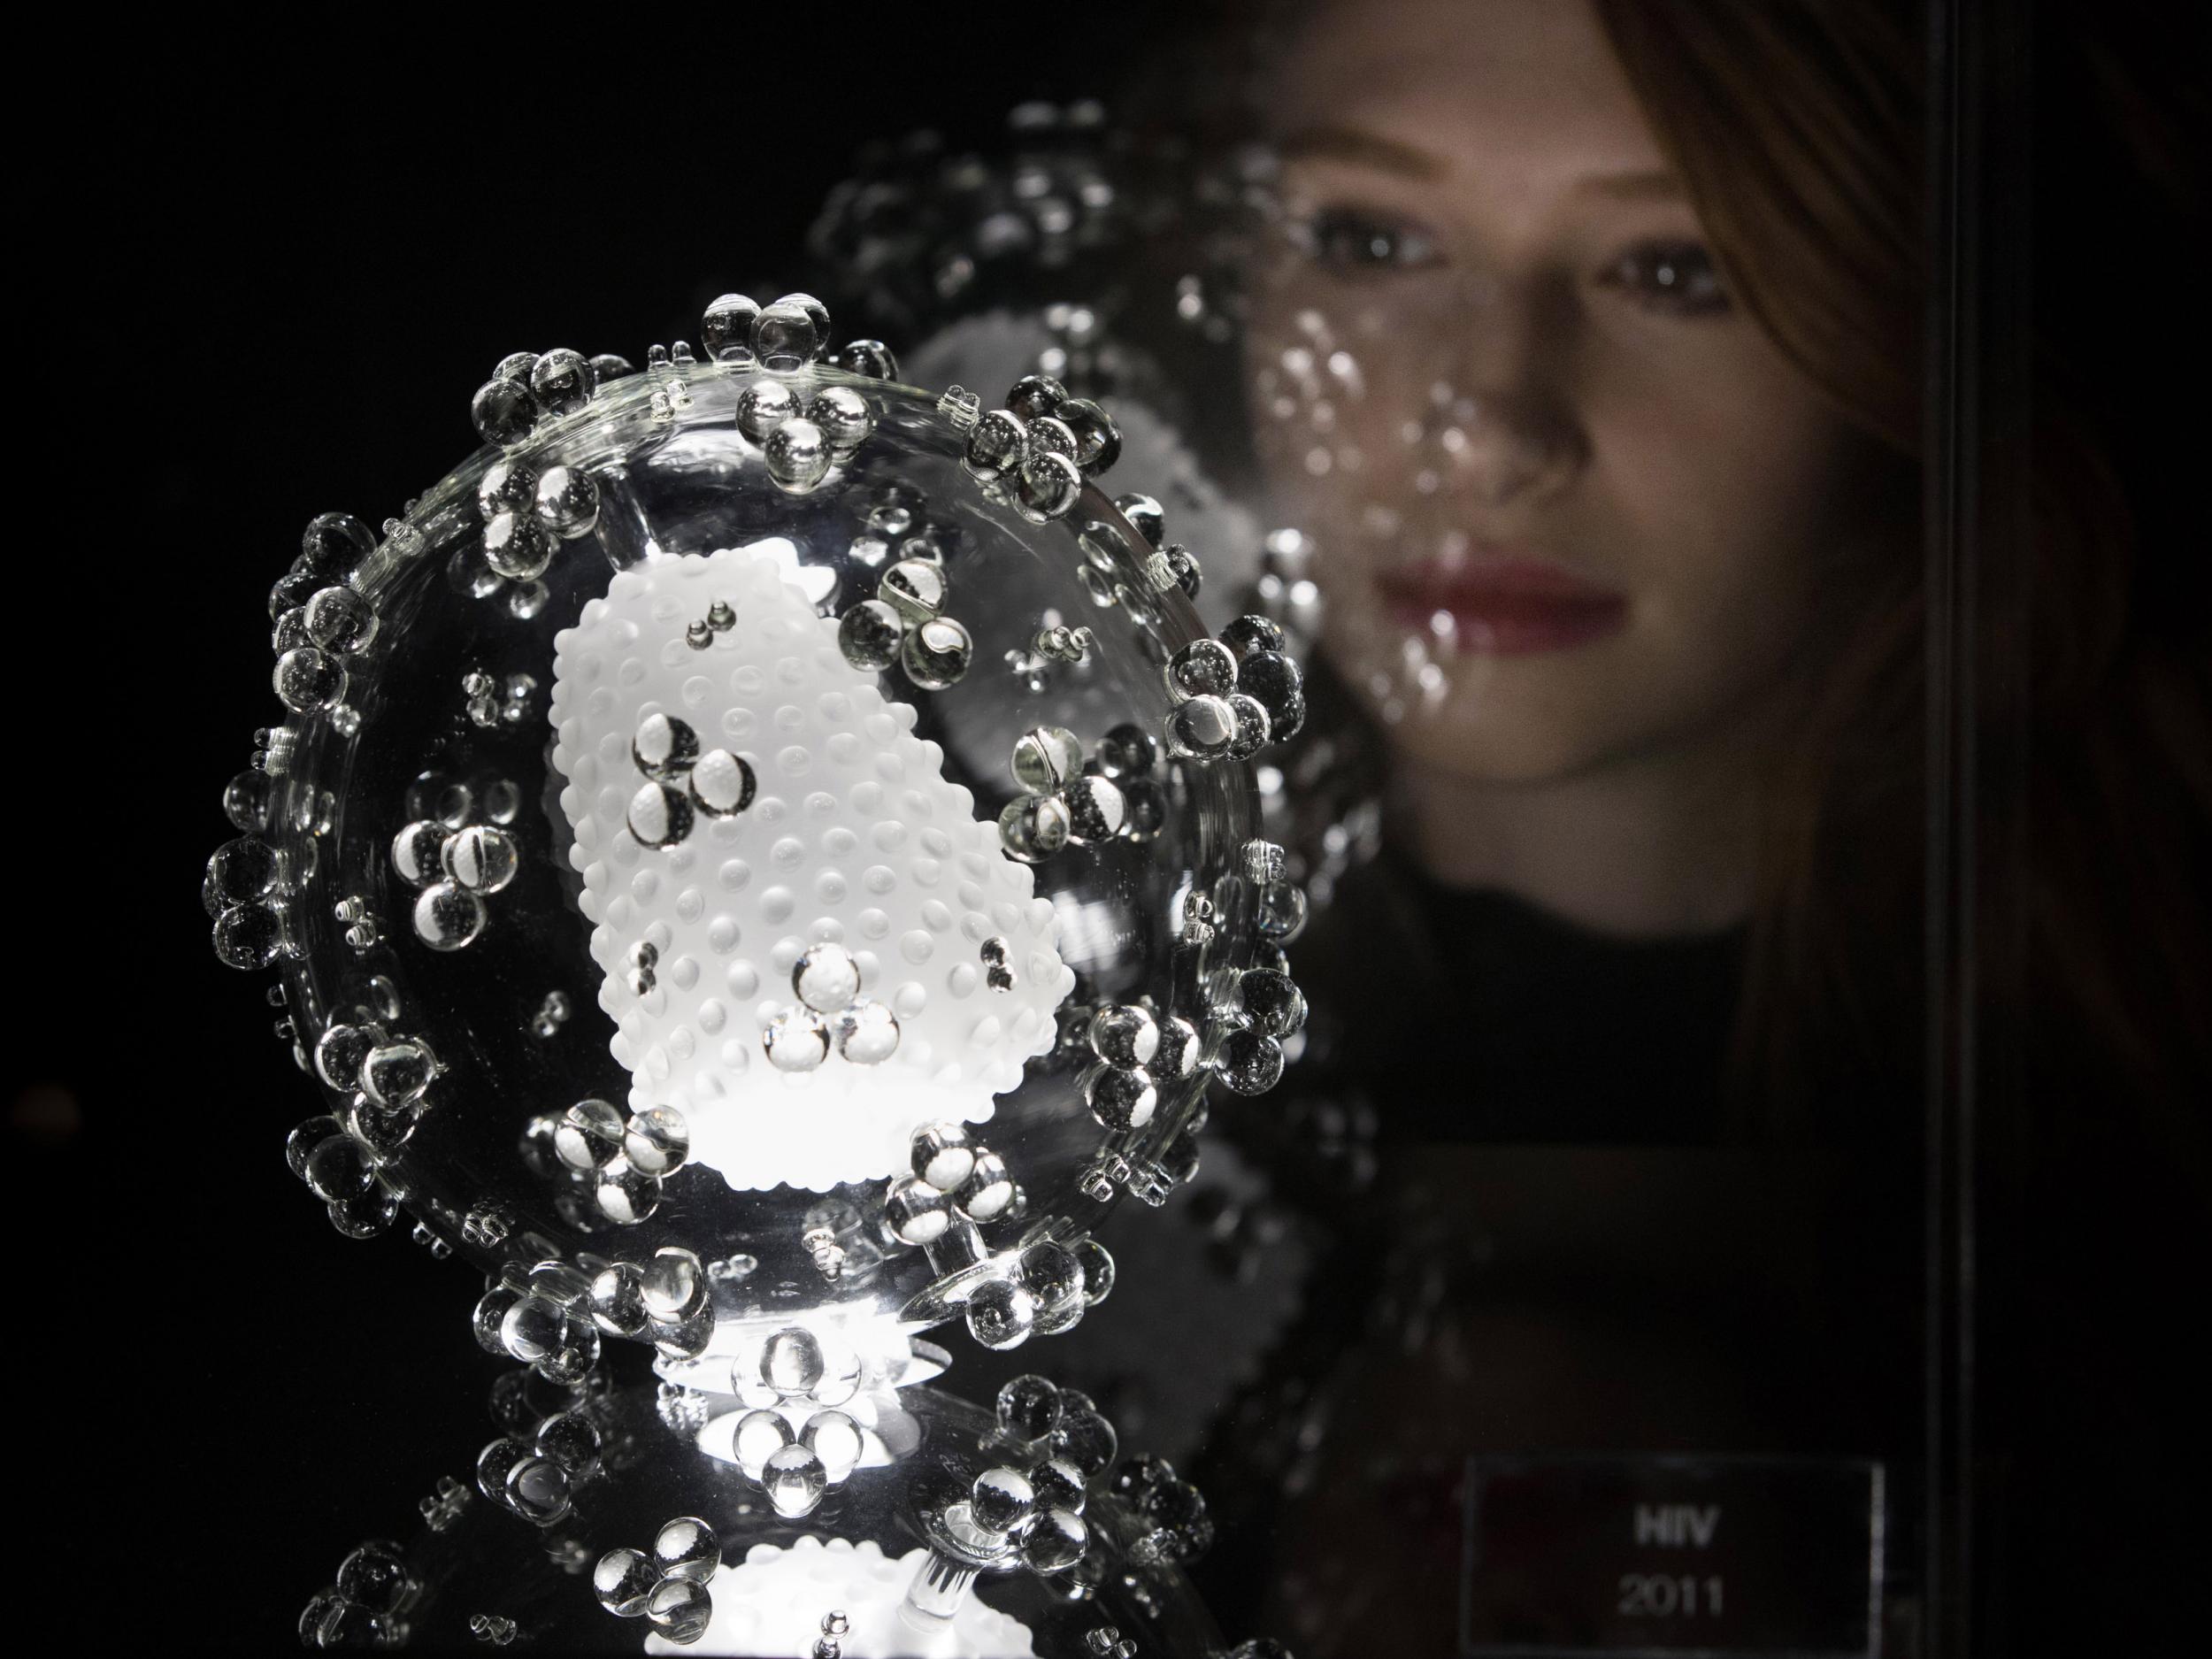 A glass sculpture of the HIV virus created by artist Luke Jerram in consultation with virologists from the University of Bristol